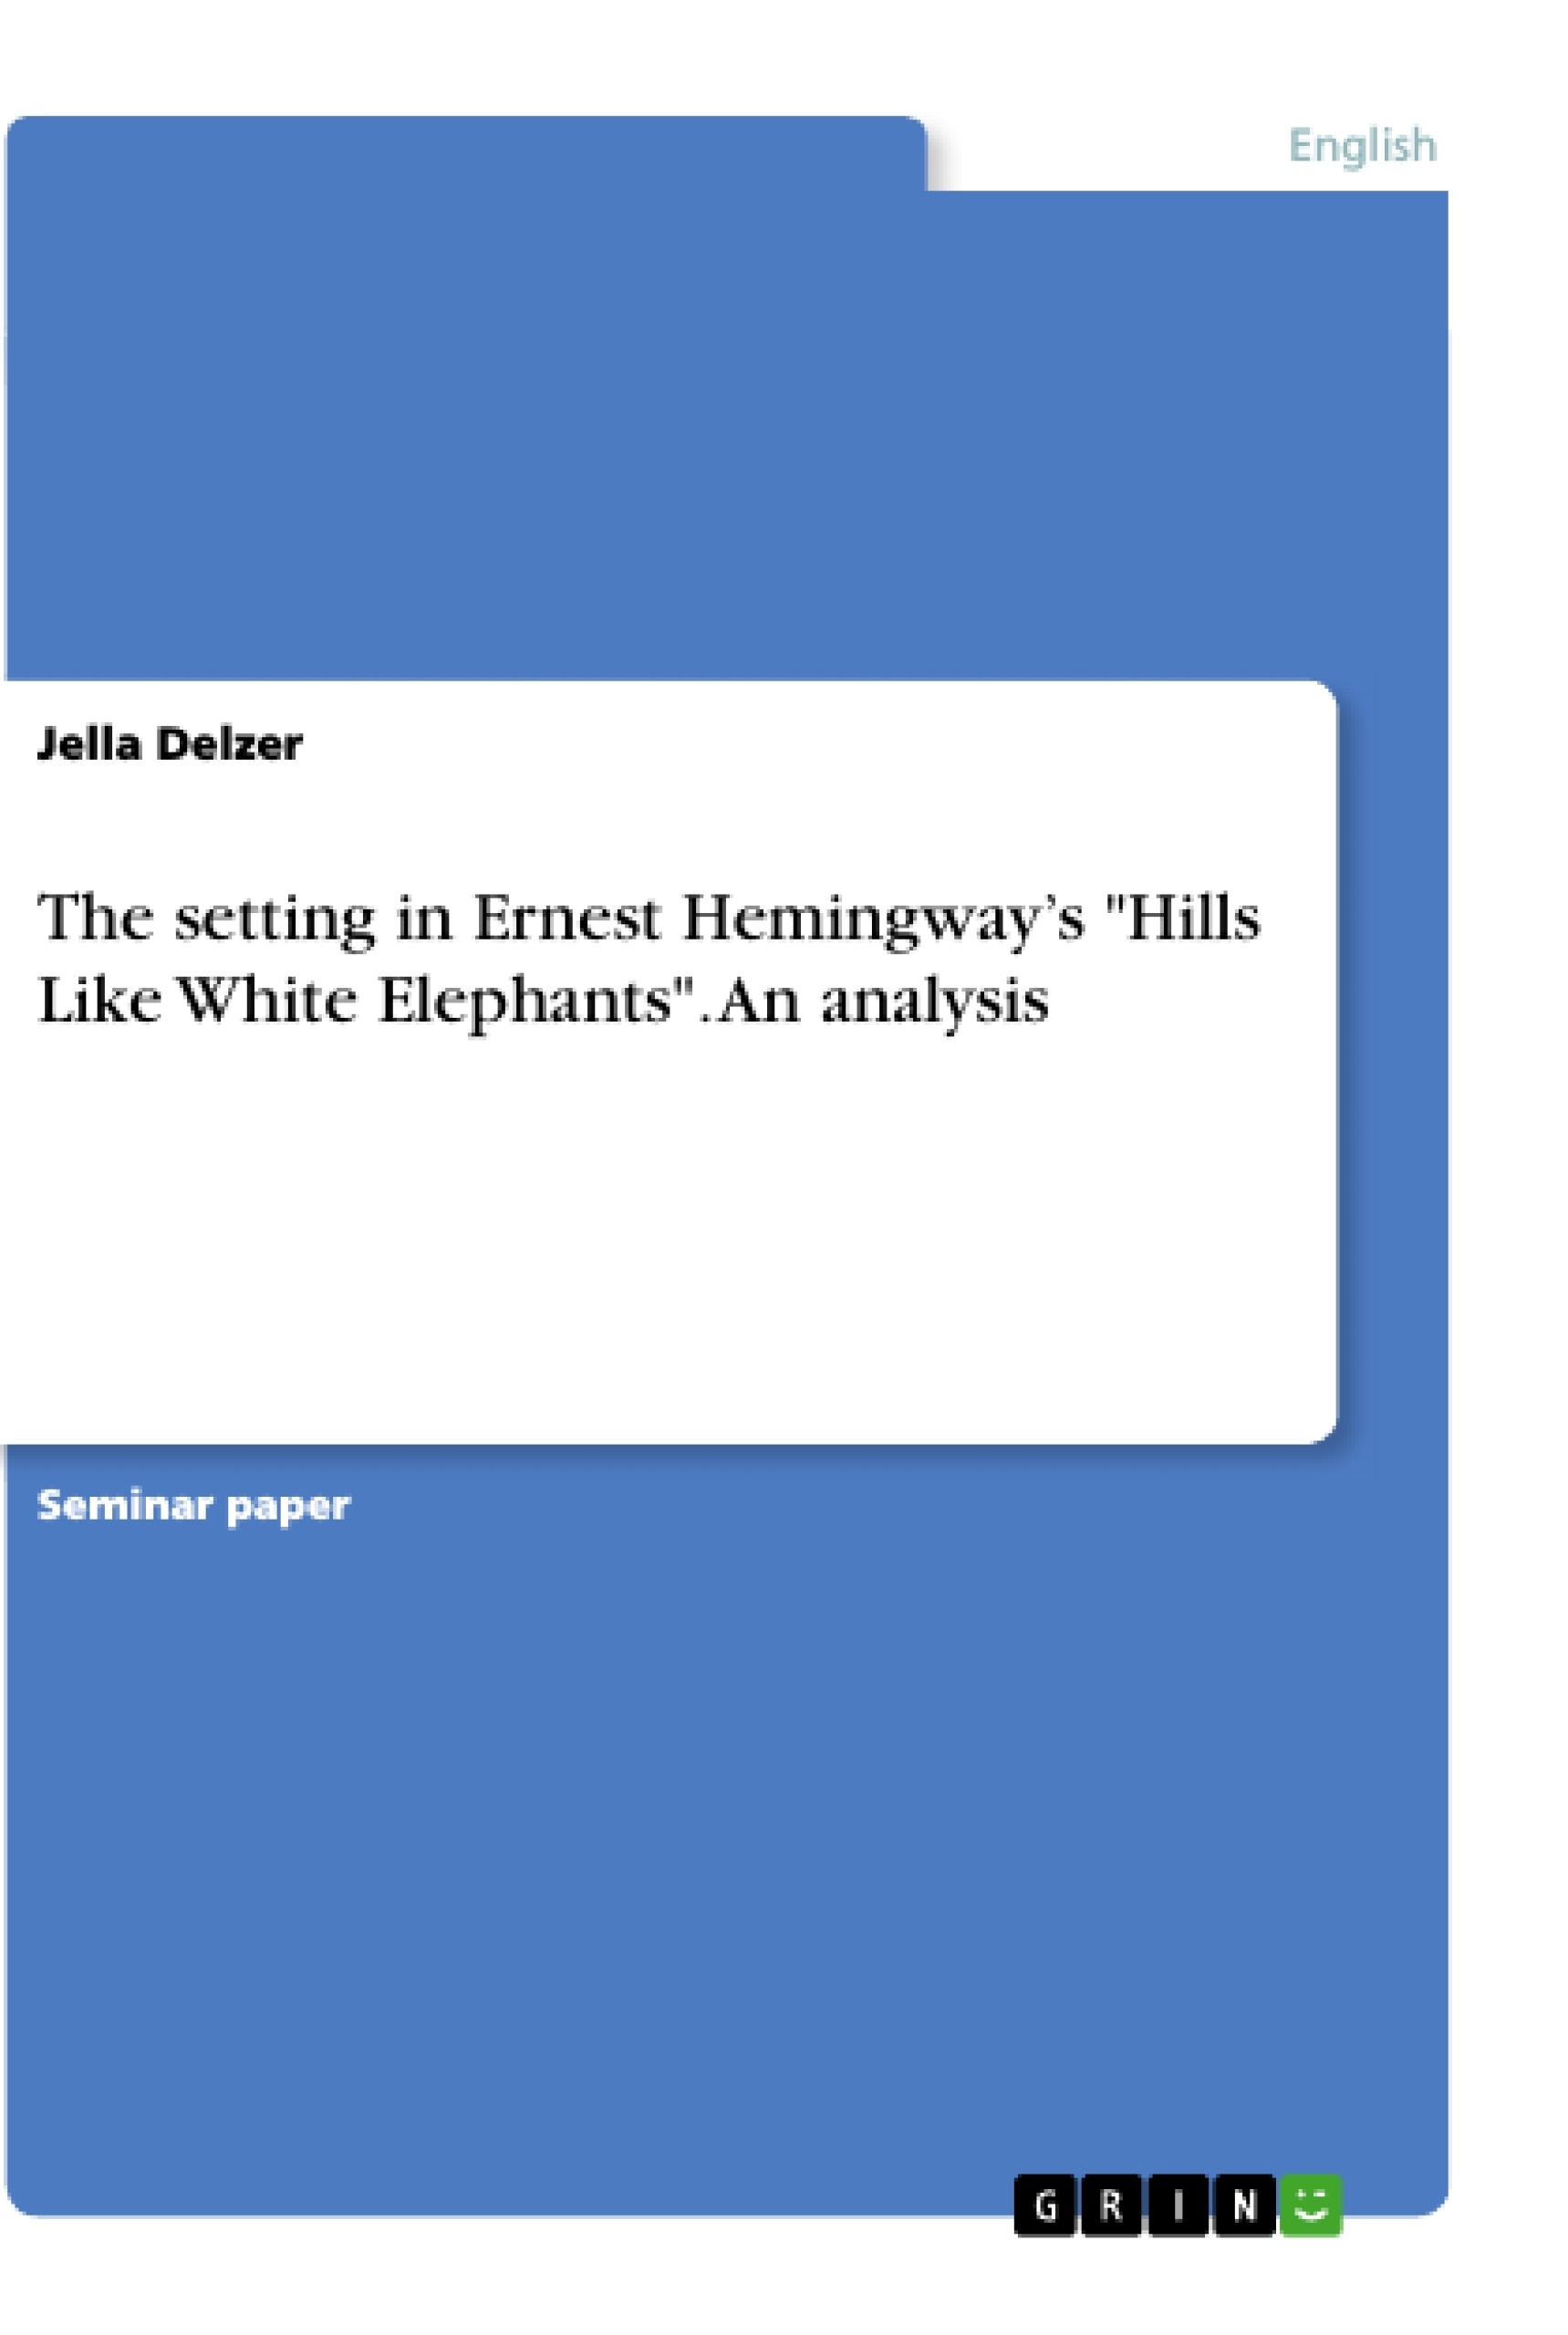 Título: The setting in Ernest Hemingway’s "Hills Like White Elephants". An analysis